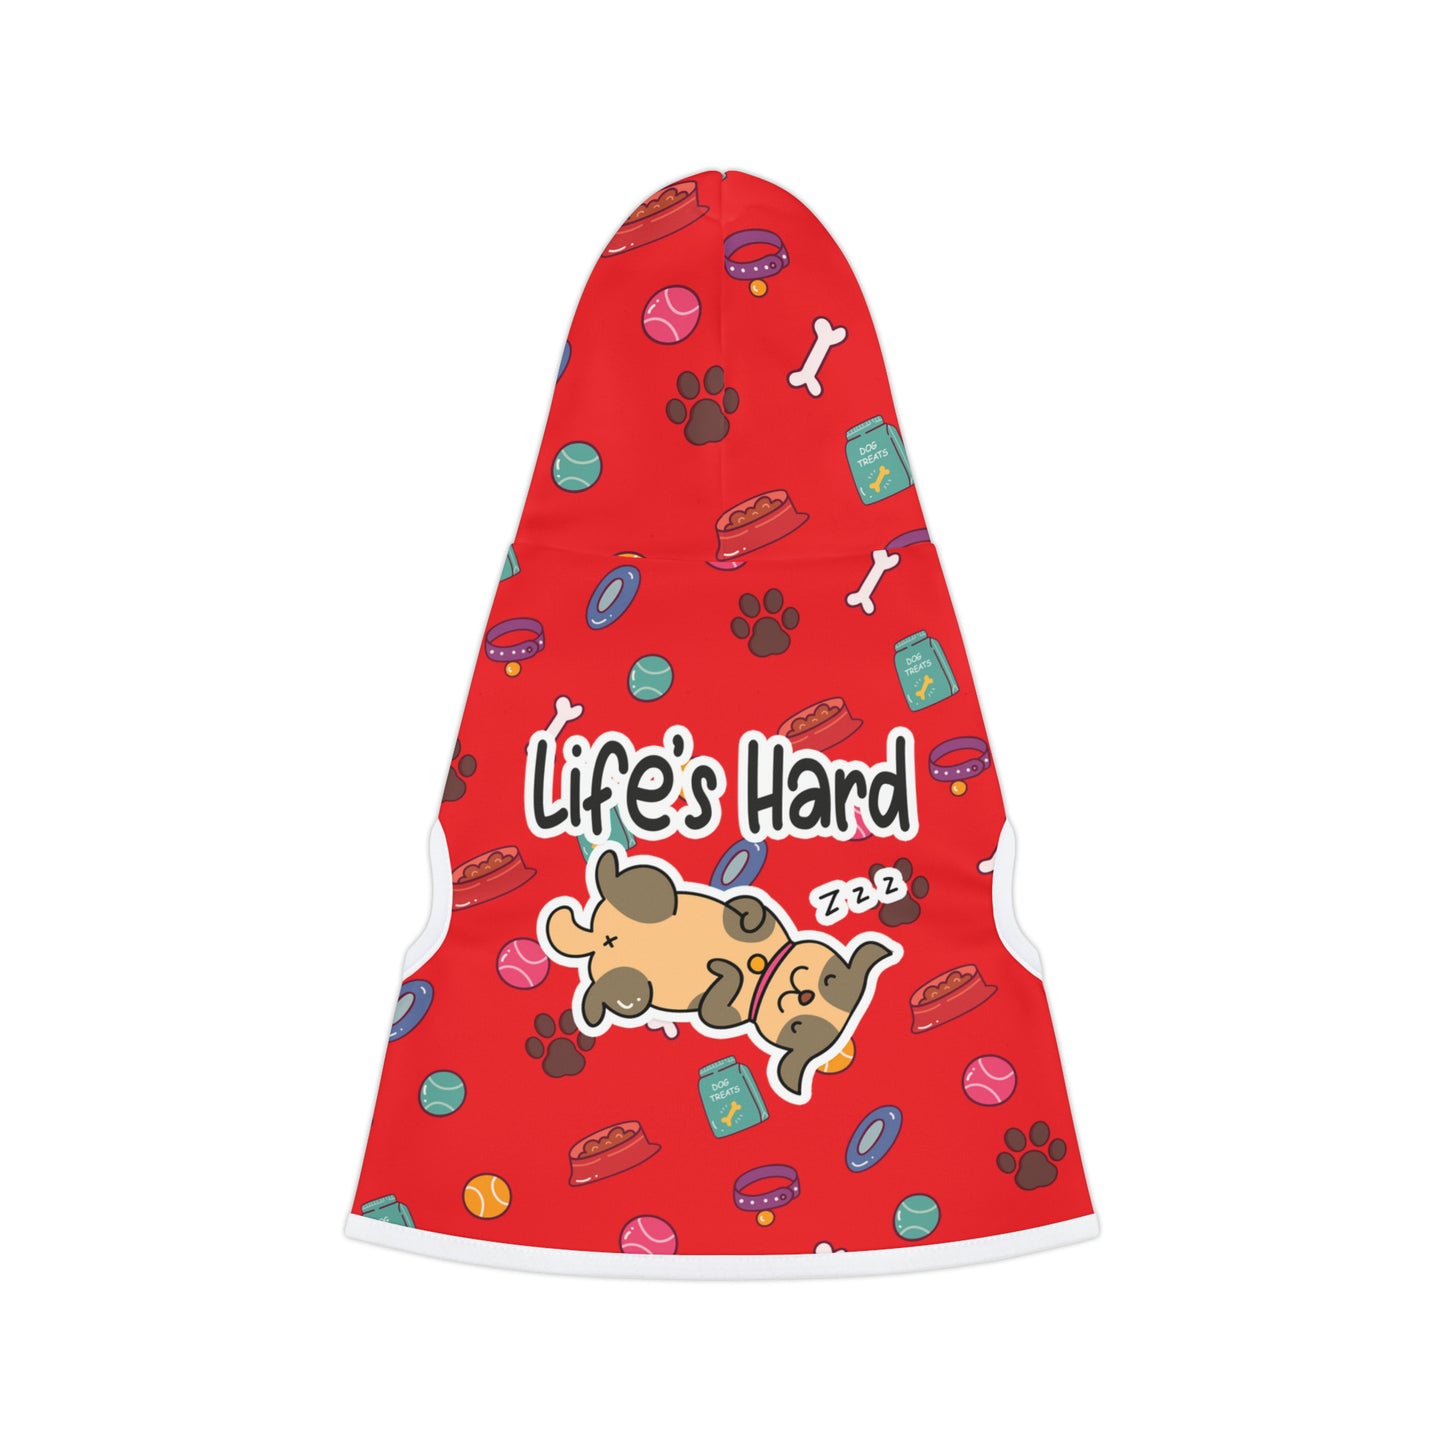 A pet hoodie with a beautiful pattern design featuring all things dog love. A smiling dog sleeping below a message that says "Life's hard". Hoodie's Color is red